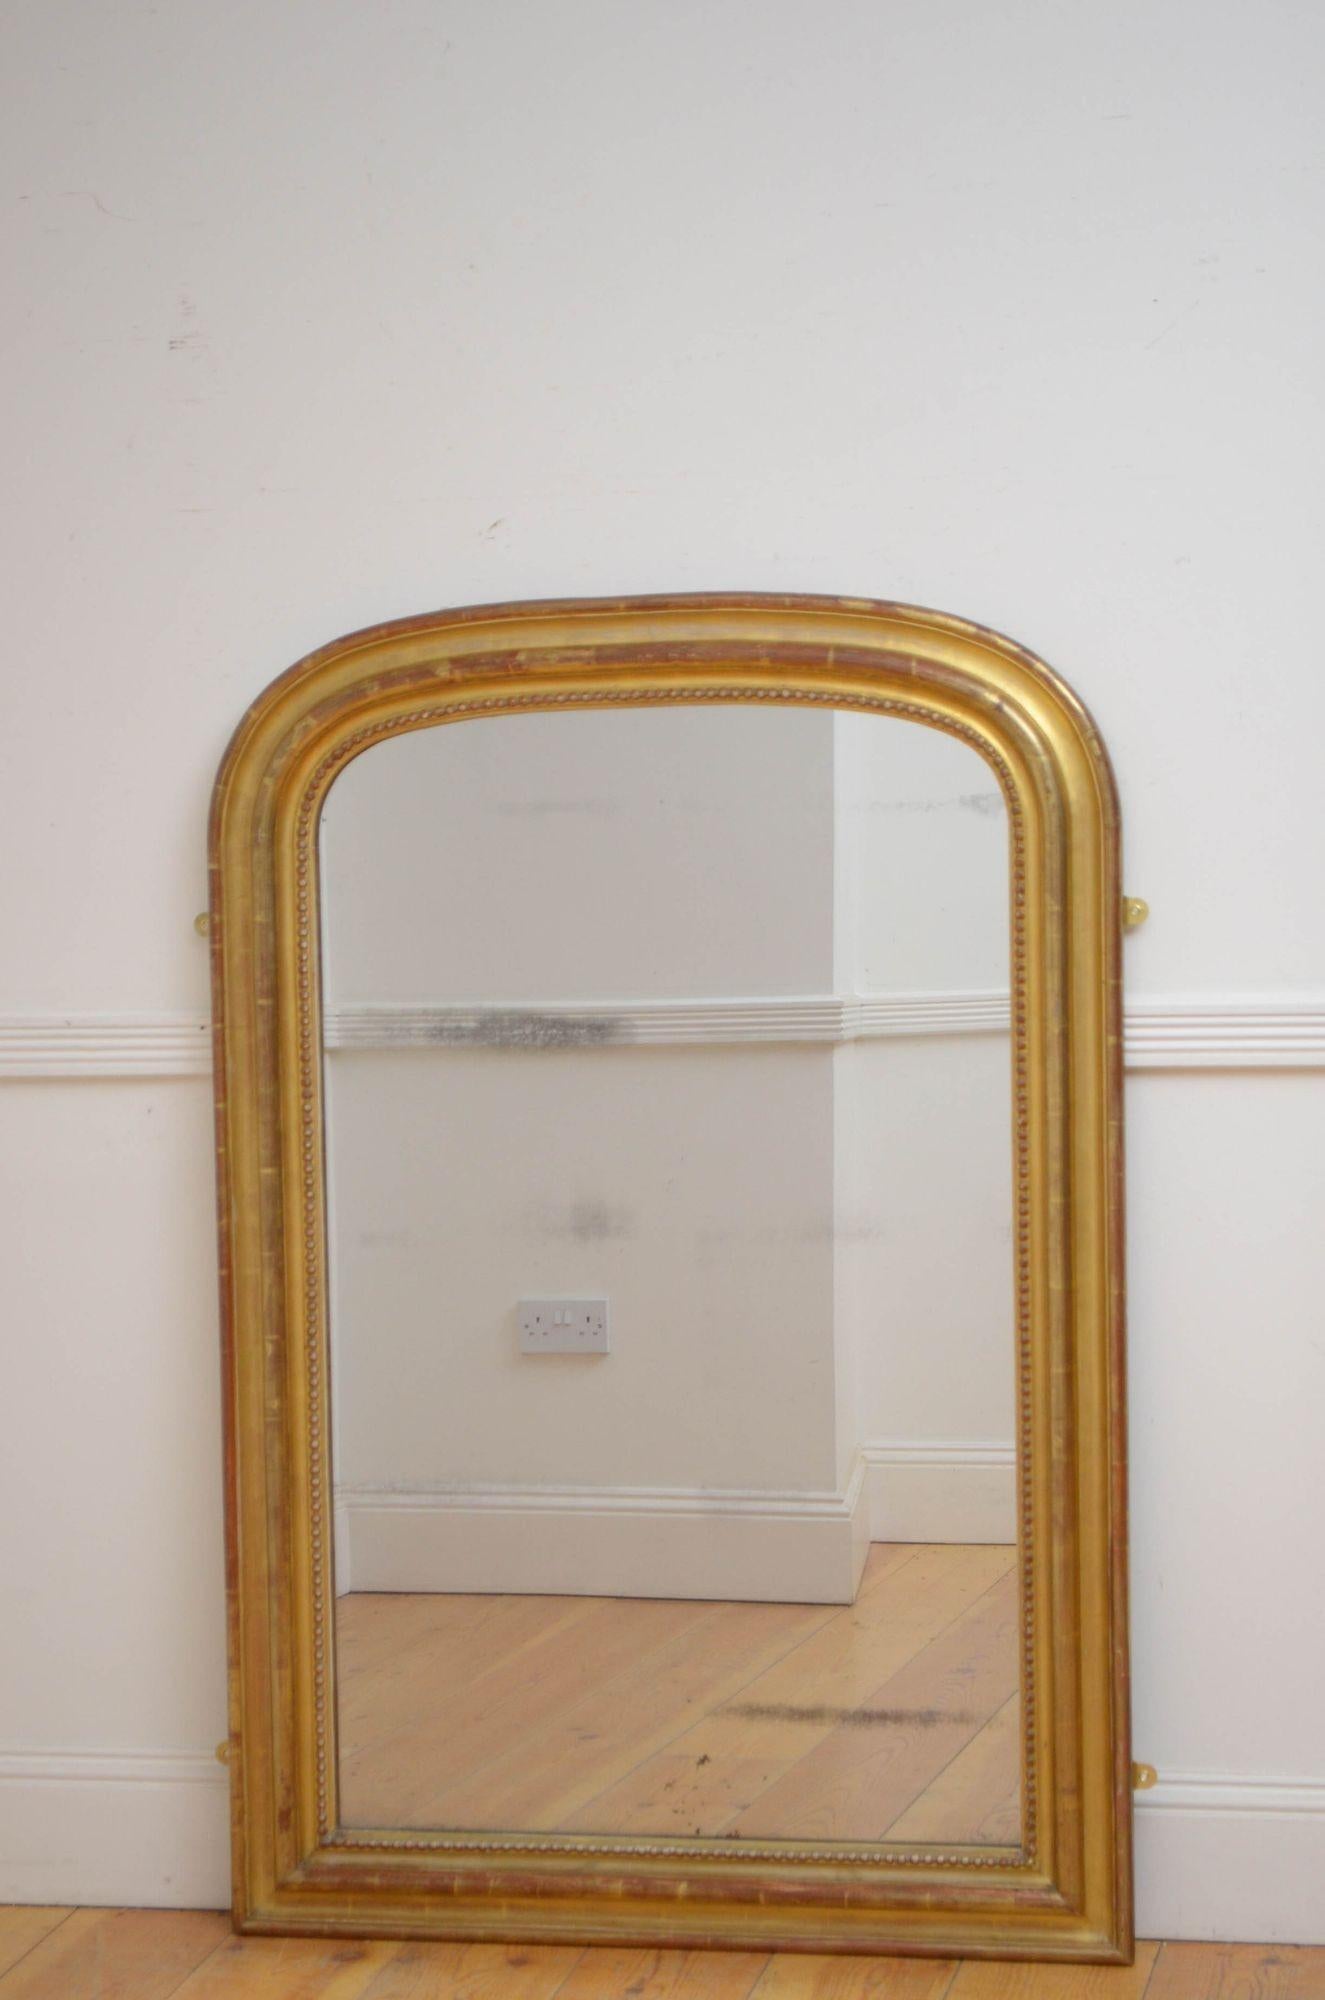 Sn5367 Louis Philippe giltwood mirror, having original glass with some foxing in moulded and gilded frame with beaded decoration to the edge. This antique mirror retains its original gilt, original glass and original backboards, all in home ready